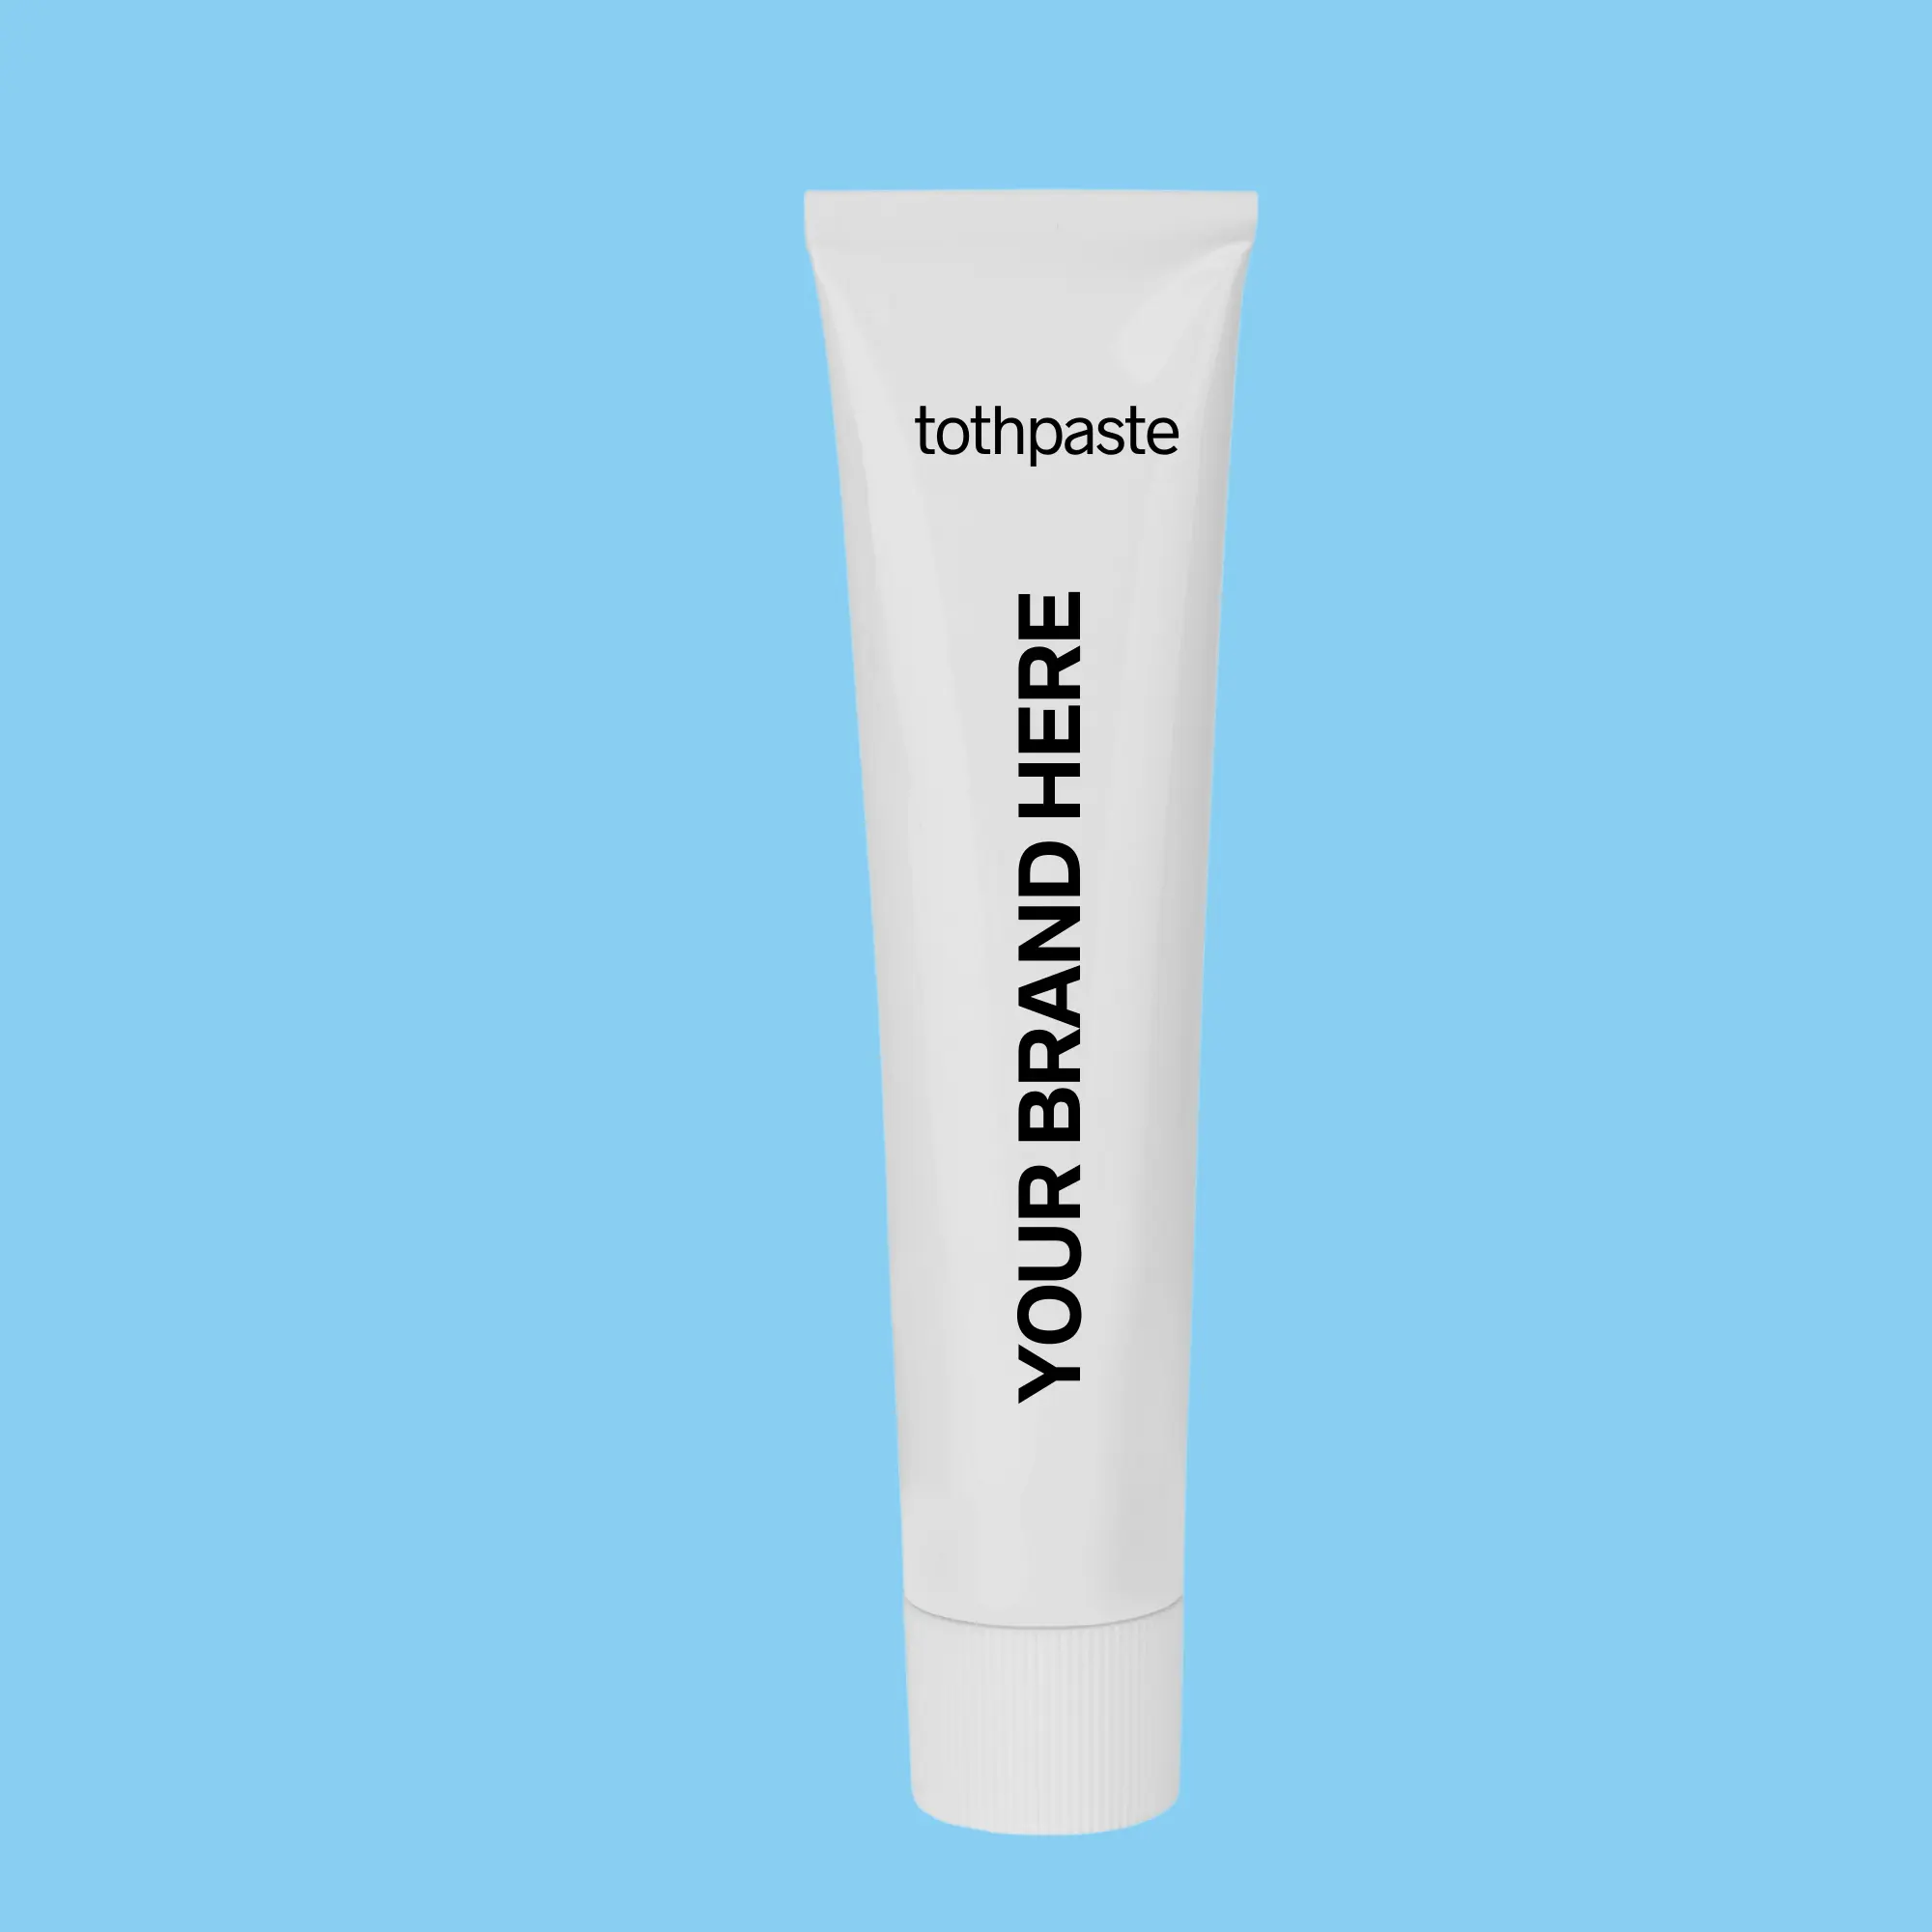 Private Label TOOTHPASTE 75 ml 100% for sale and for export Highest Quality Italian manufacturer 75 ml